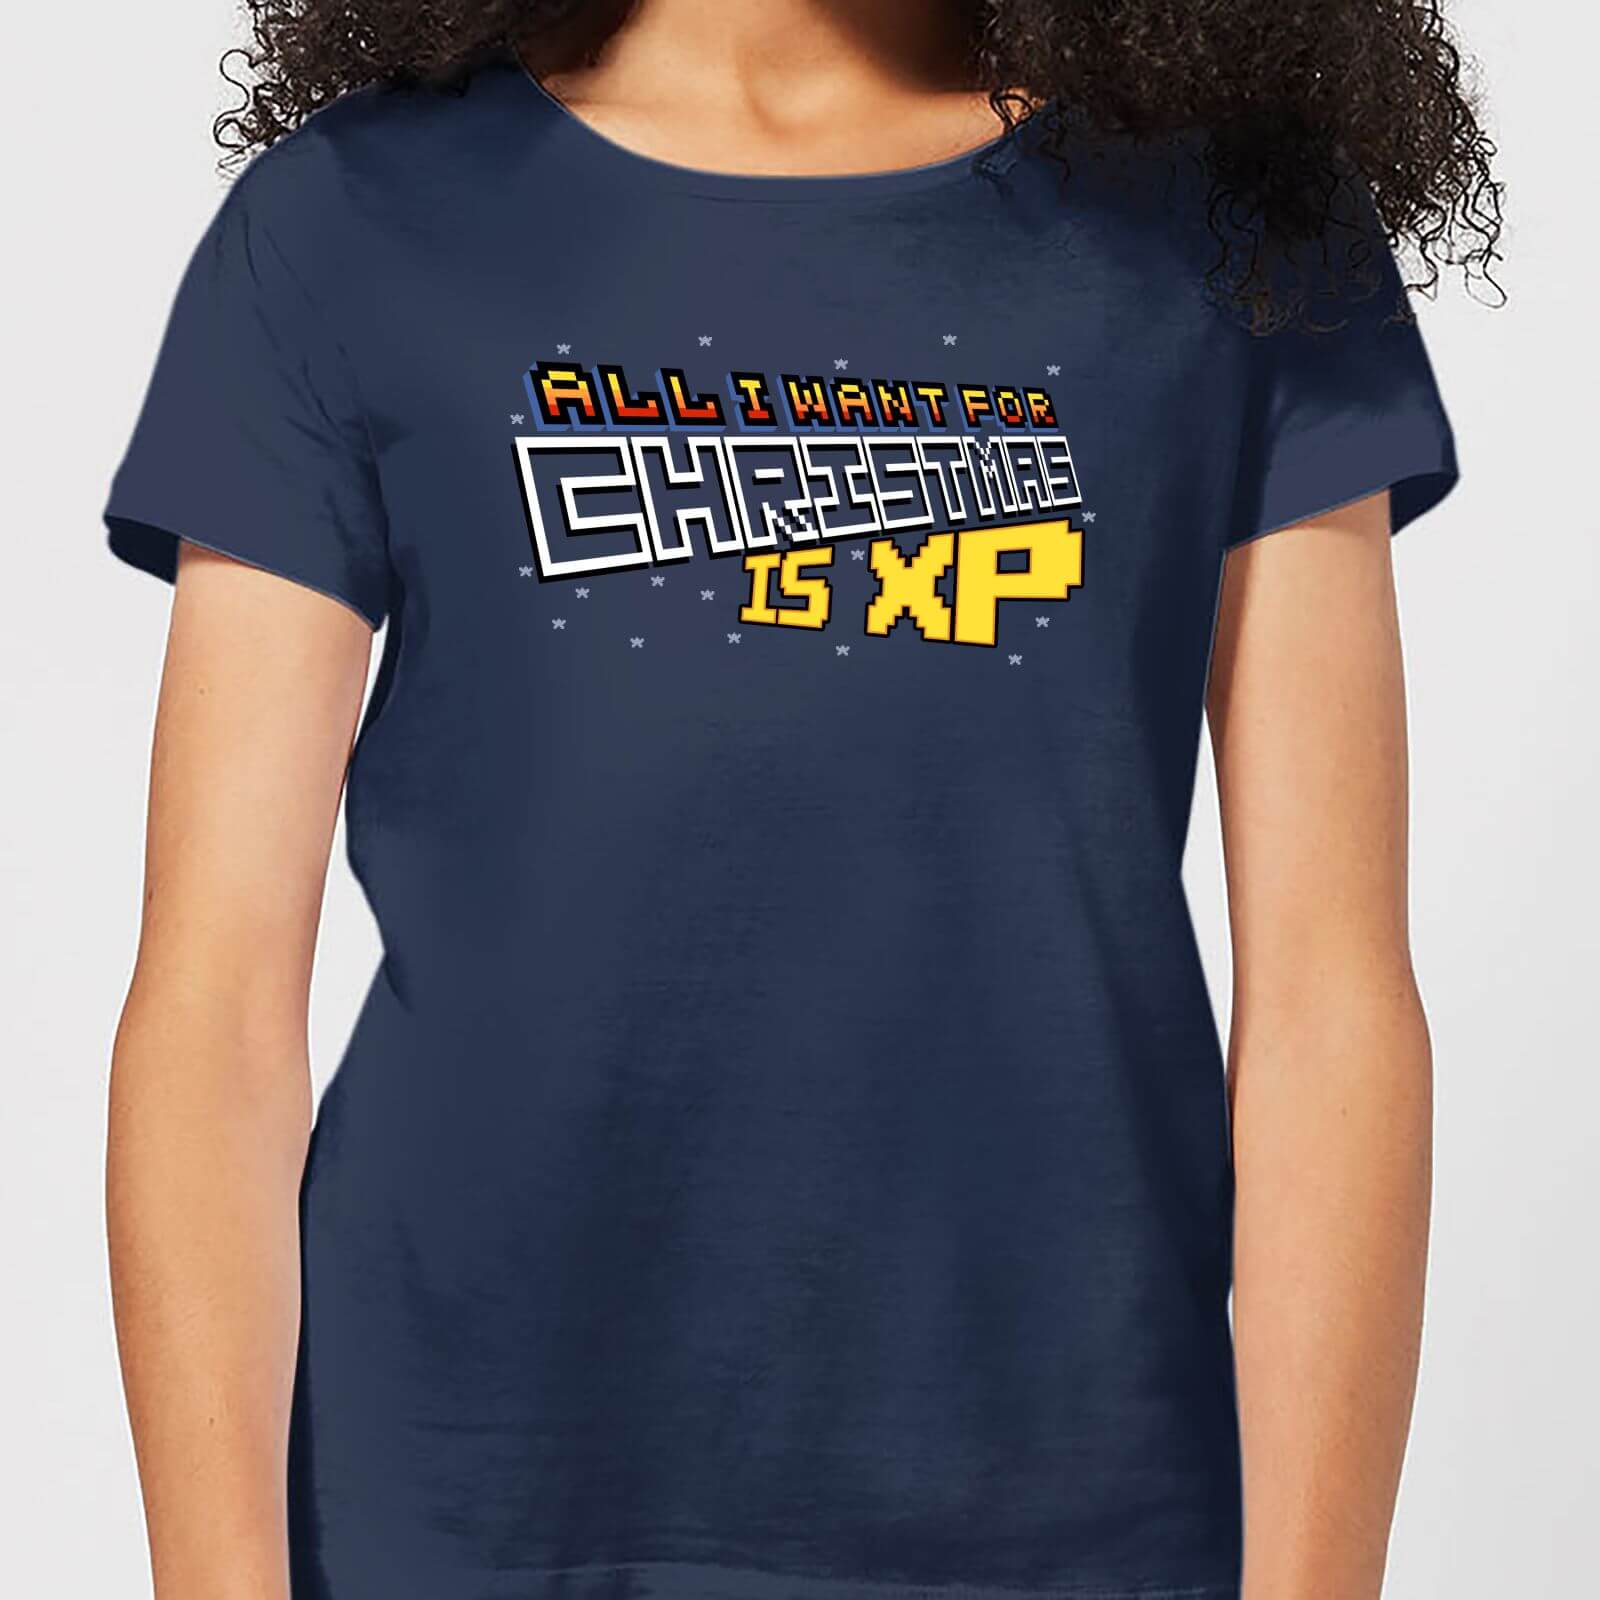 All I Want For Xmas Is XP Women's T-Shirt - Navy - M - Navy